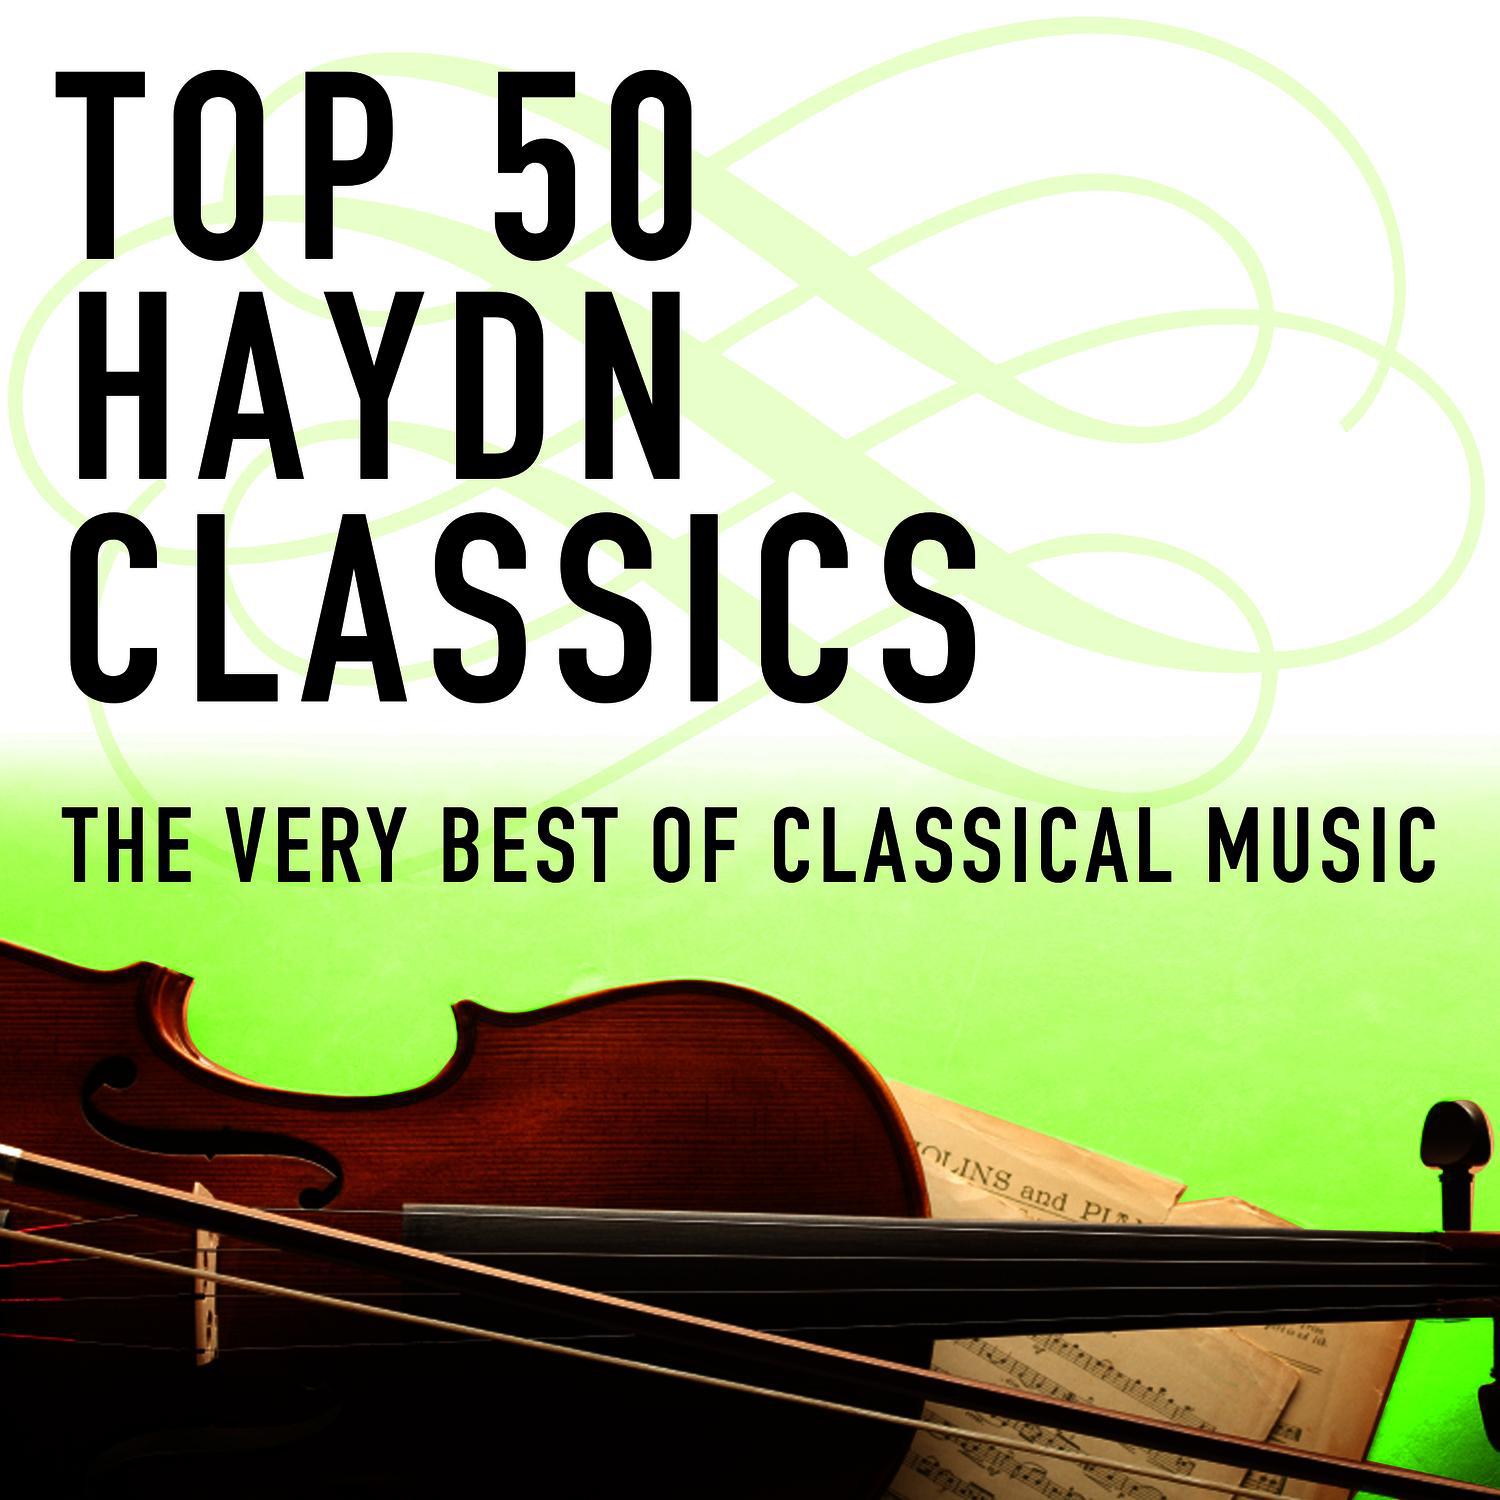 Top 50 Haydn Classics - The Very Best of Classical Music